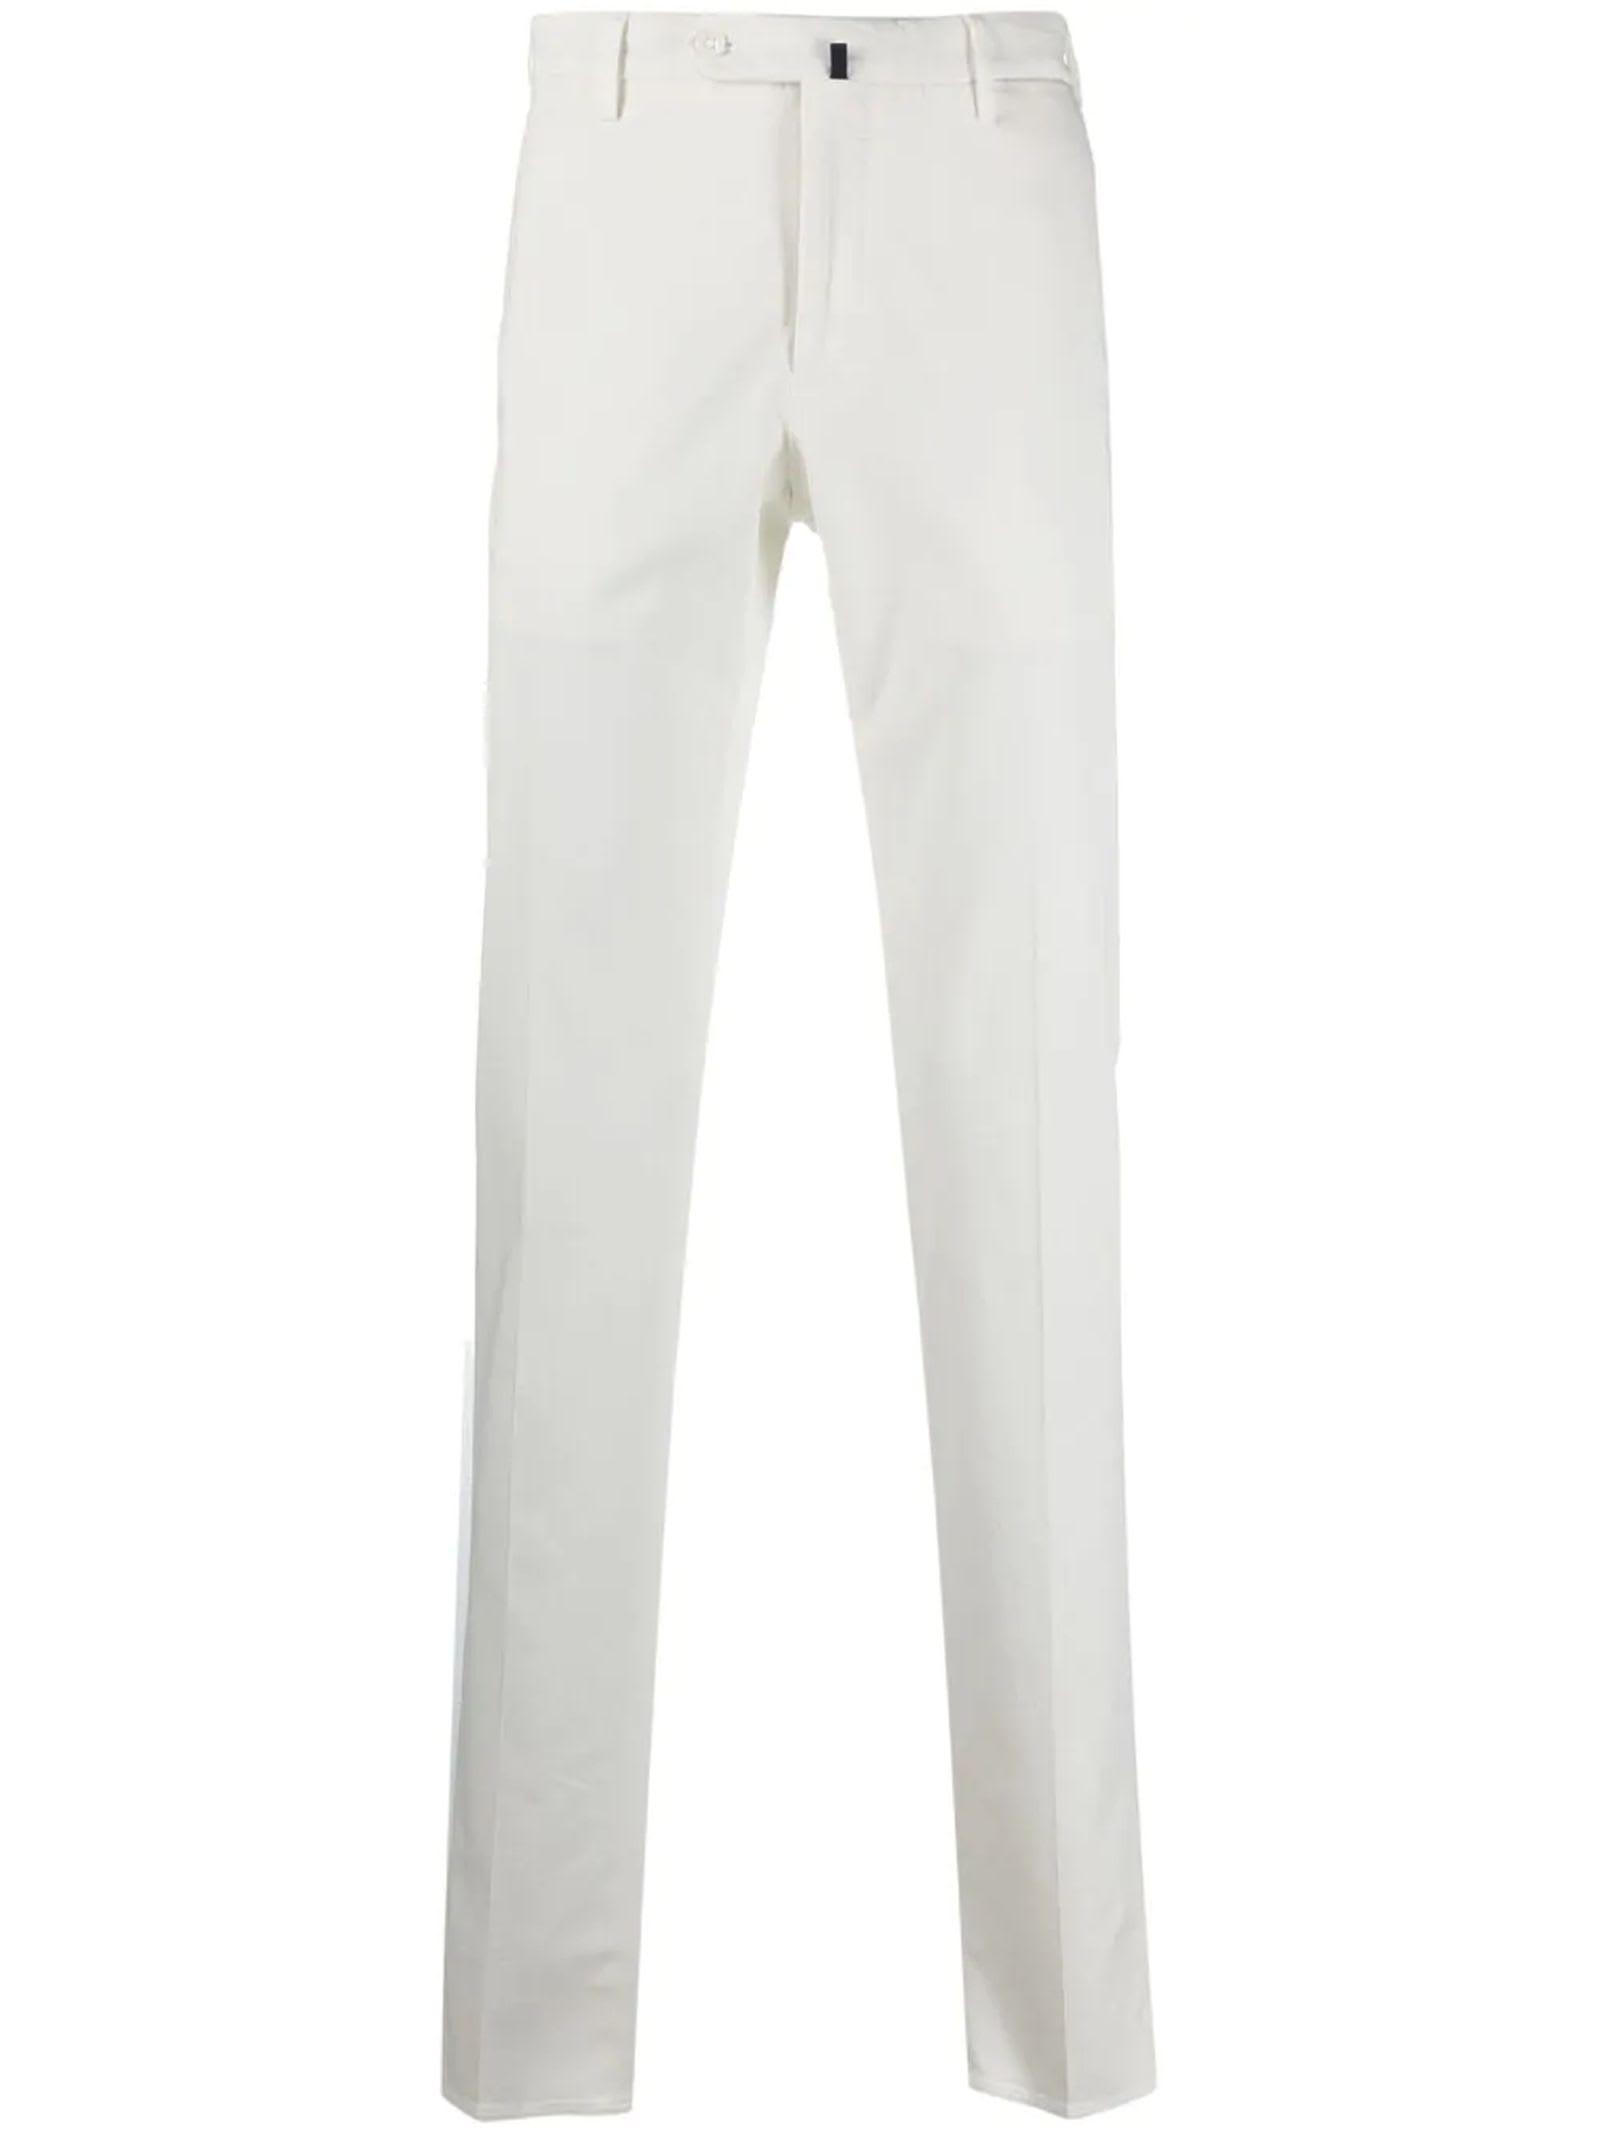 Incotex White Cotton Tailored Trousers